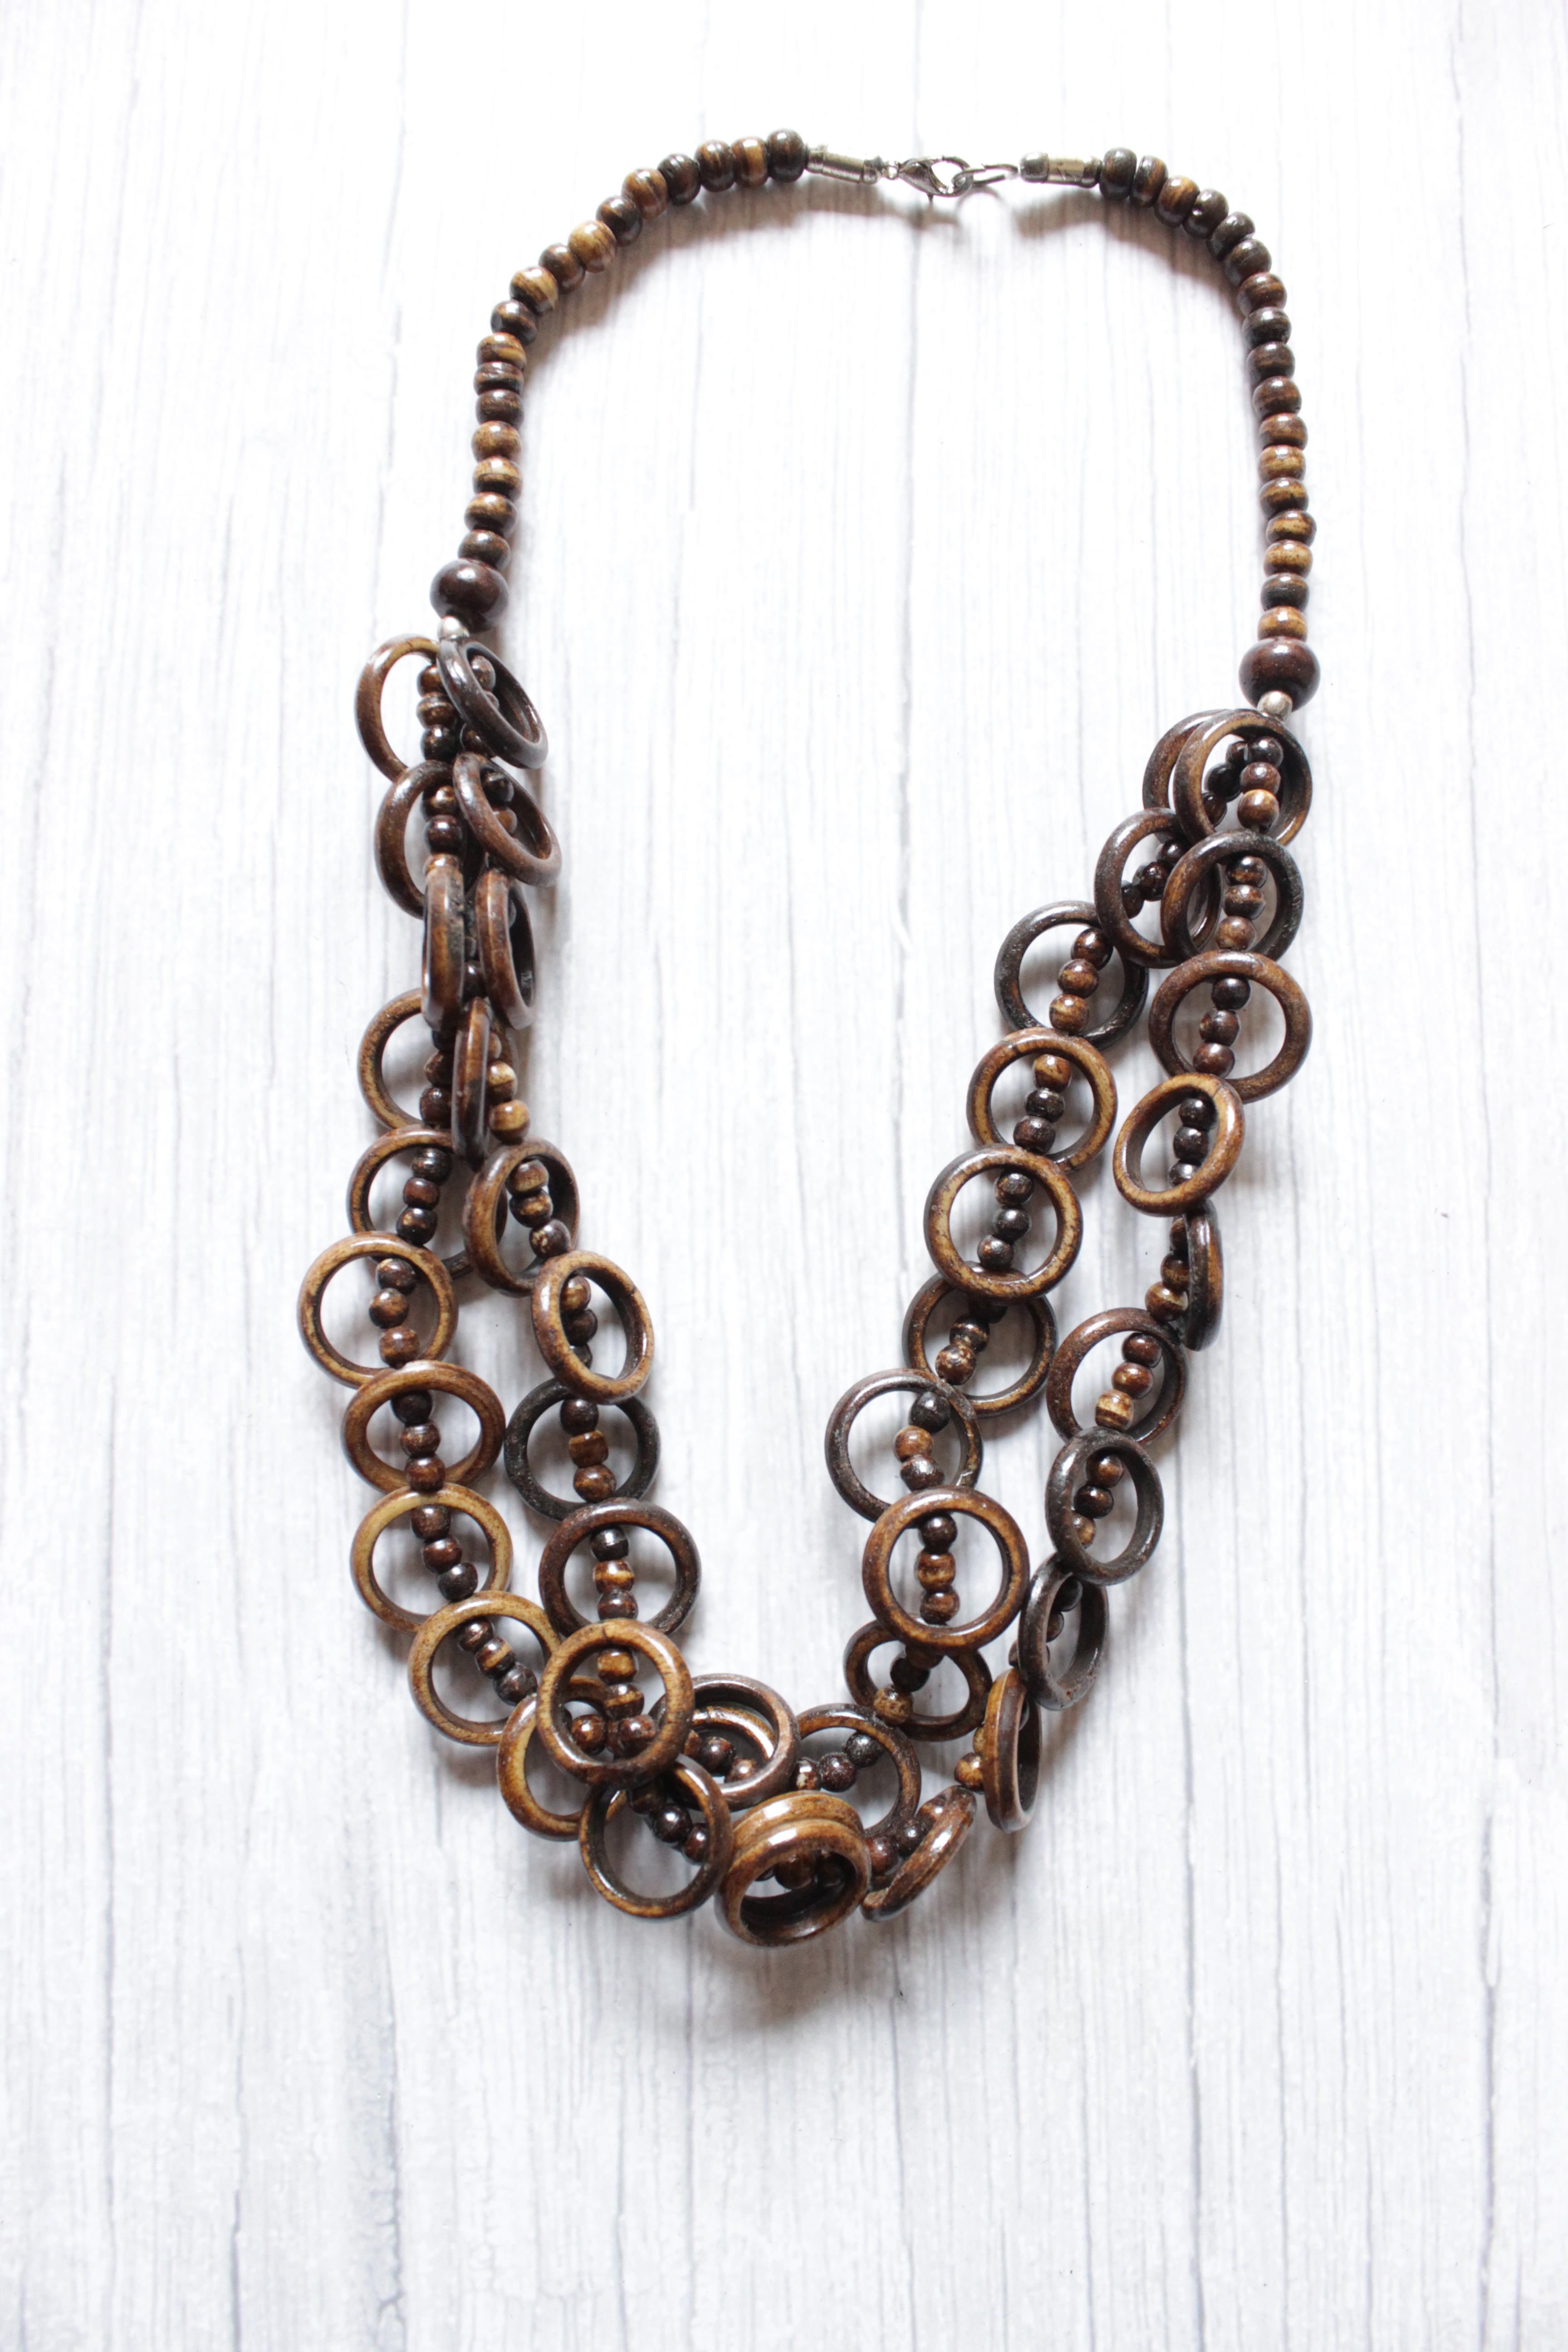 Circular Wooden Beads Handcrafted Necklace